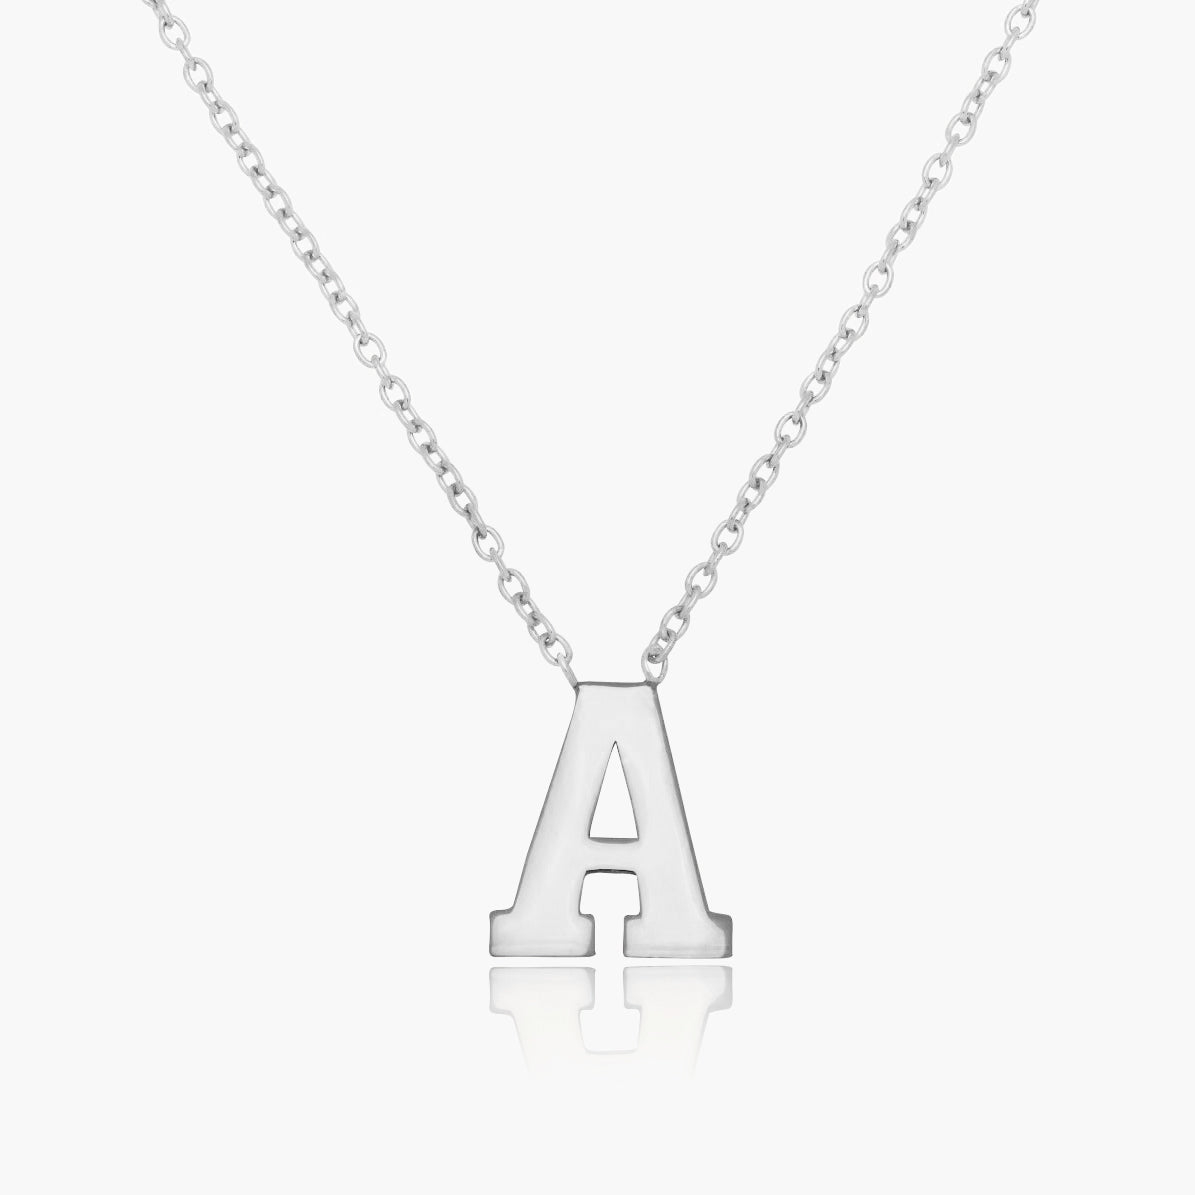 Block Initial Necklace